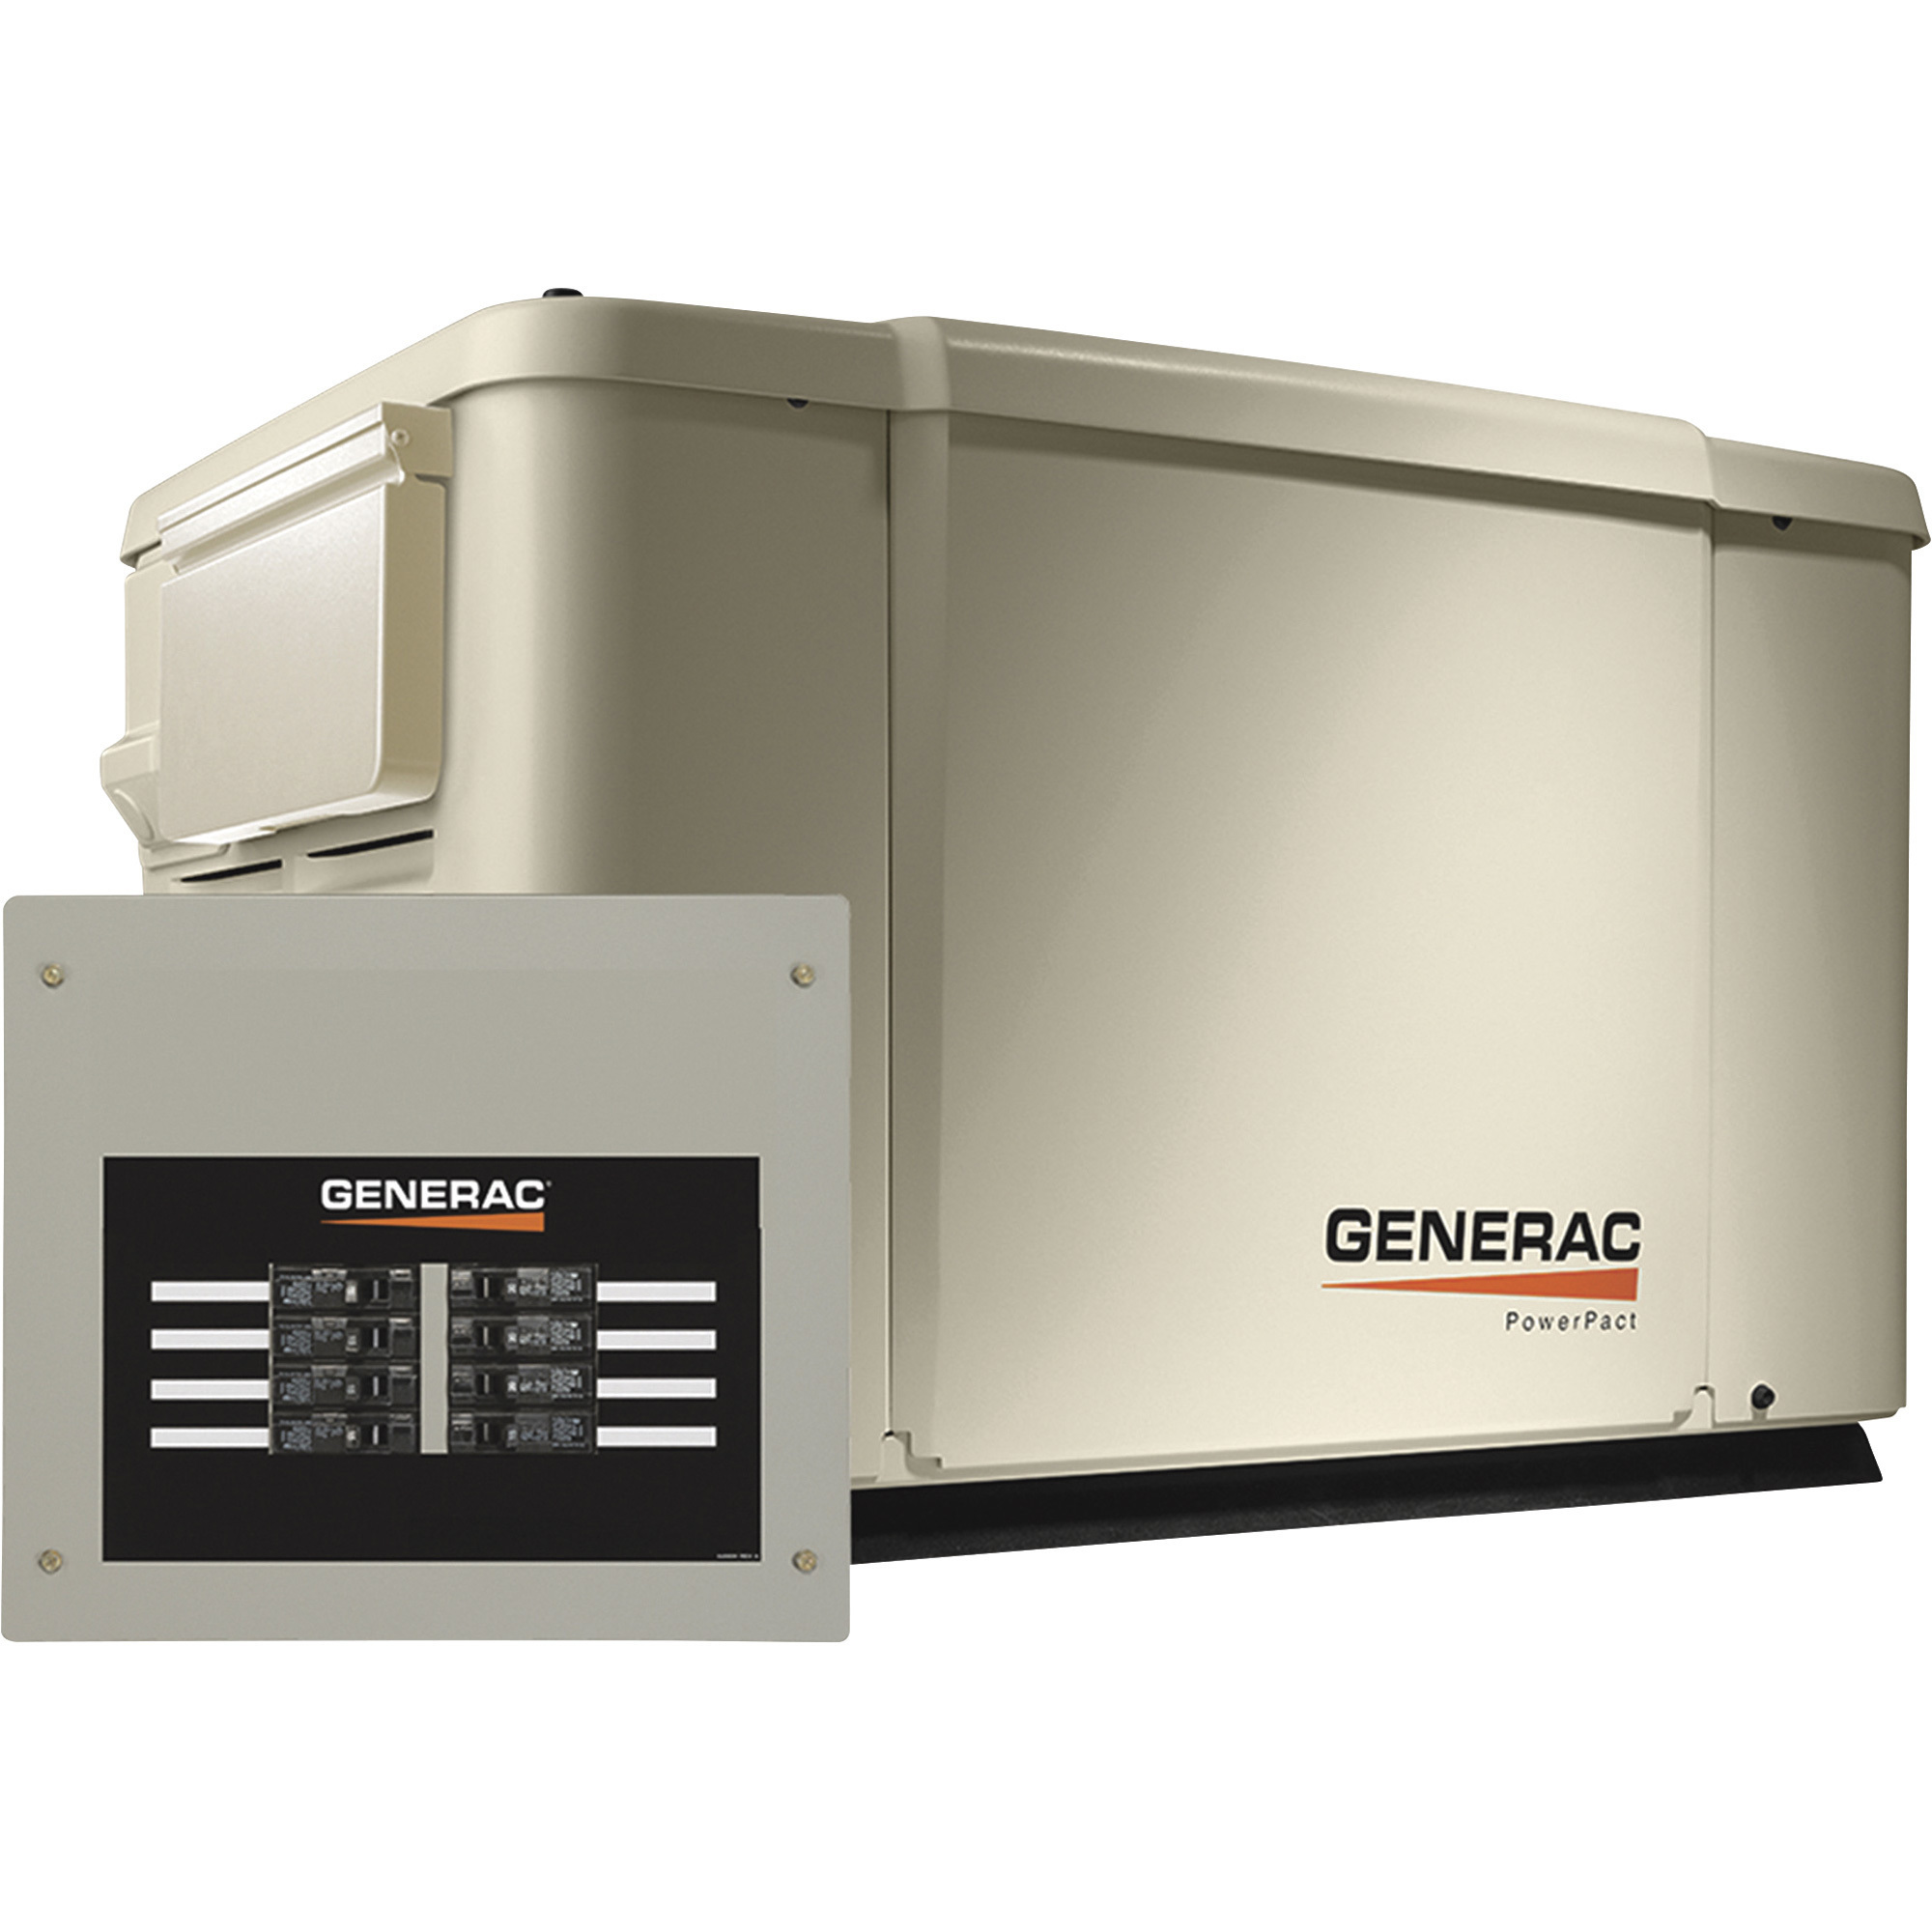 Generac 7.5kW (LP)/6kW (NG) PowerPact Air-Cooled Home Standby Generator - Model 6998